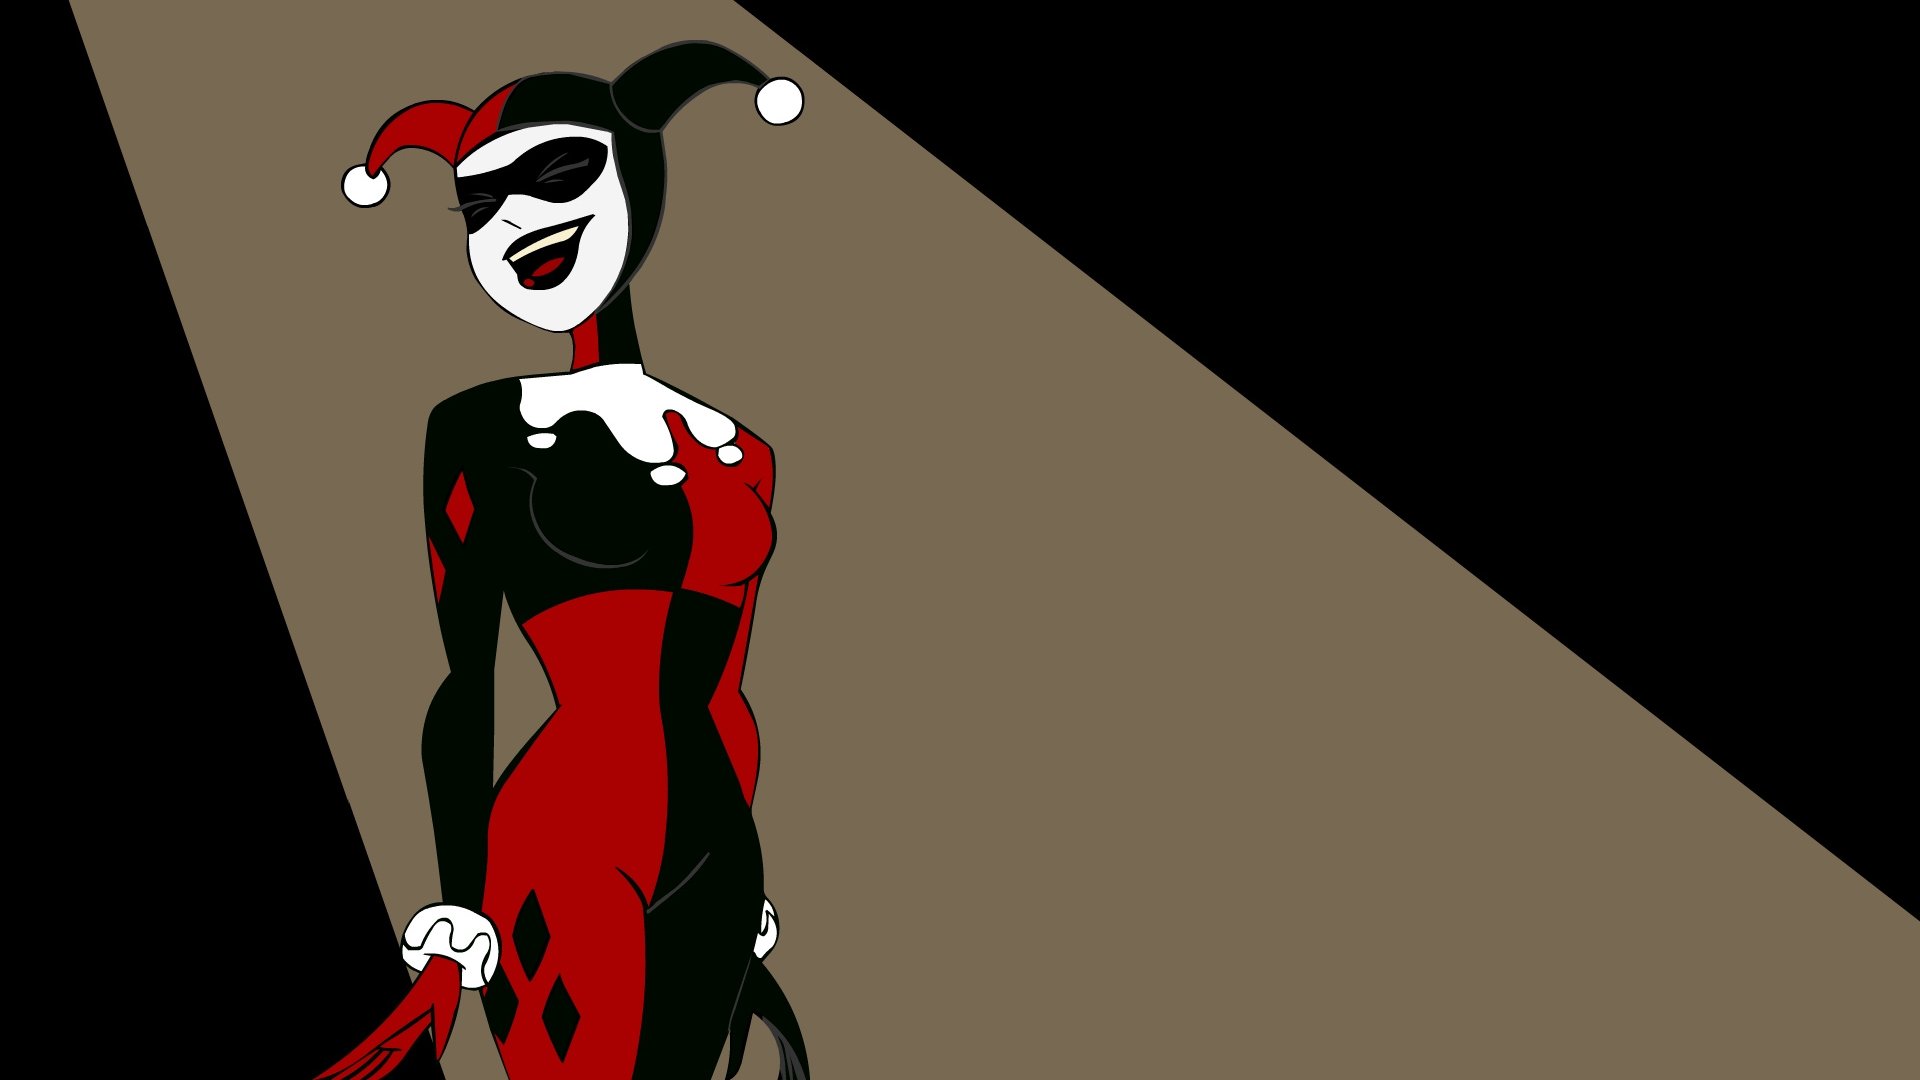 Harley Quinn from Batman: The Animated Series